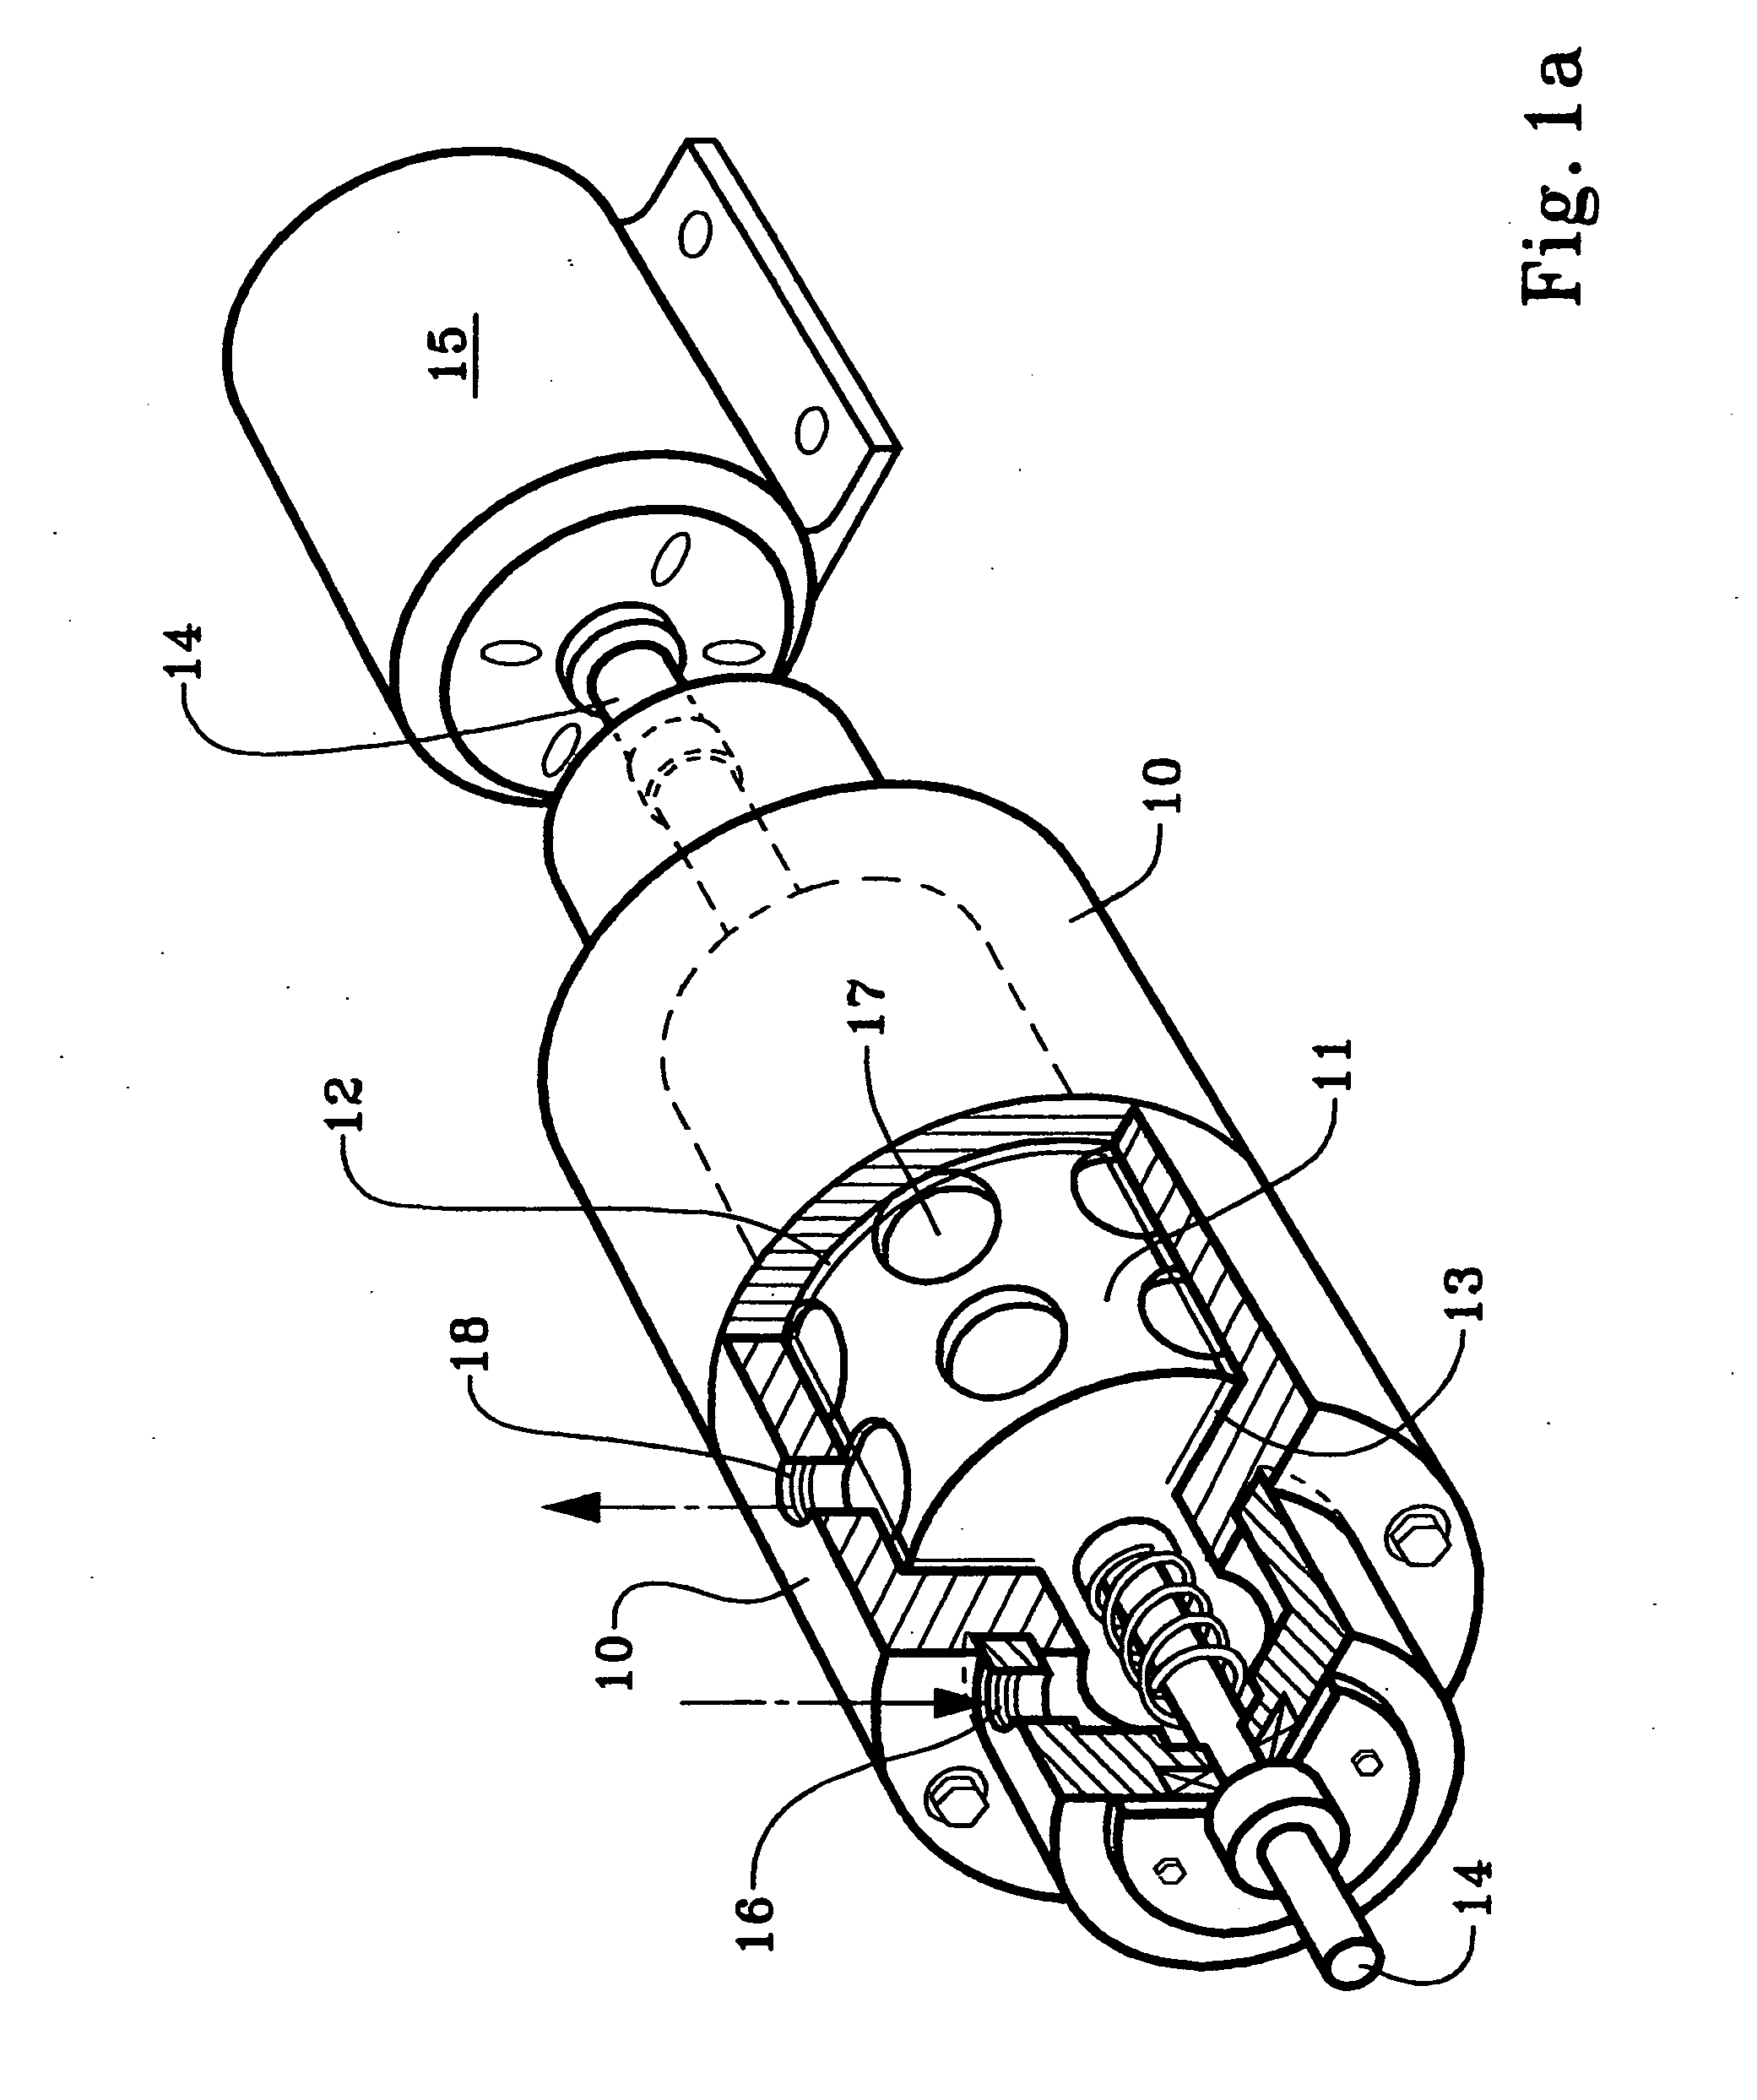 Method of removing dissolved iron in aqueous systems